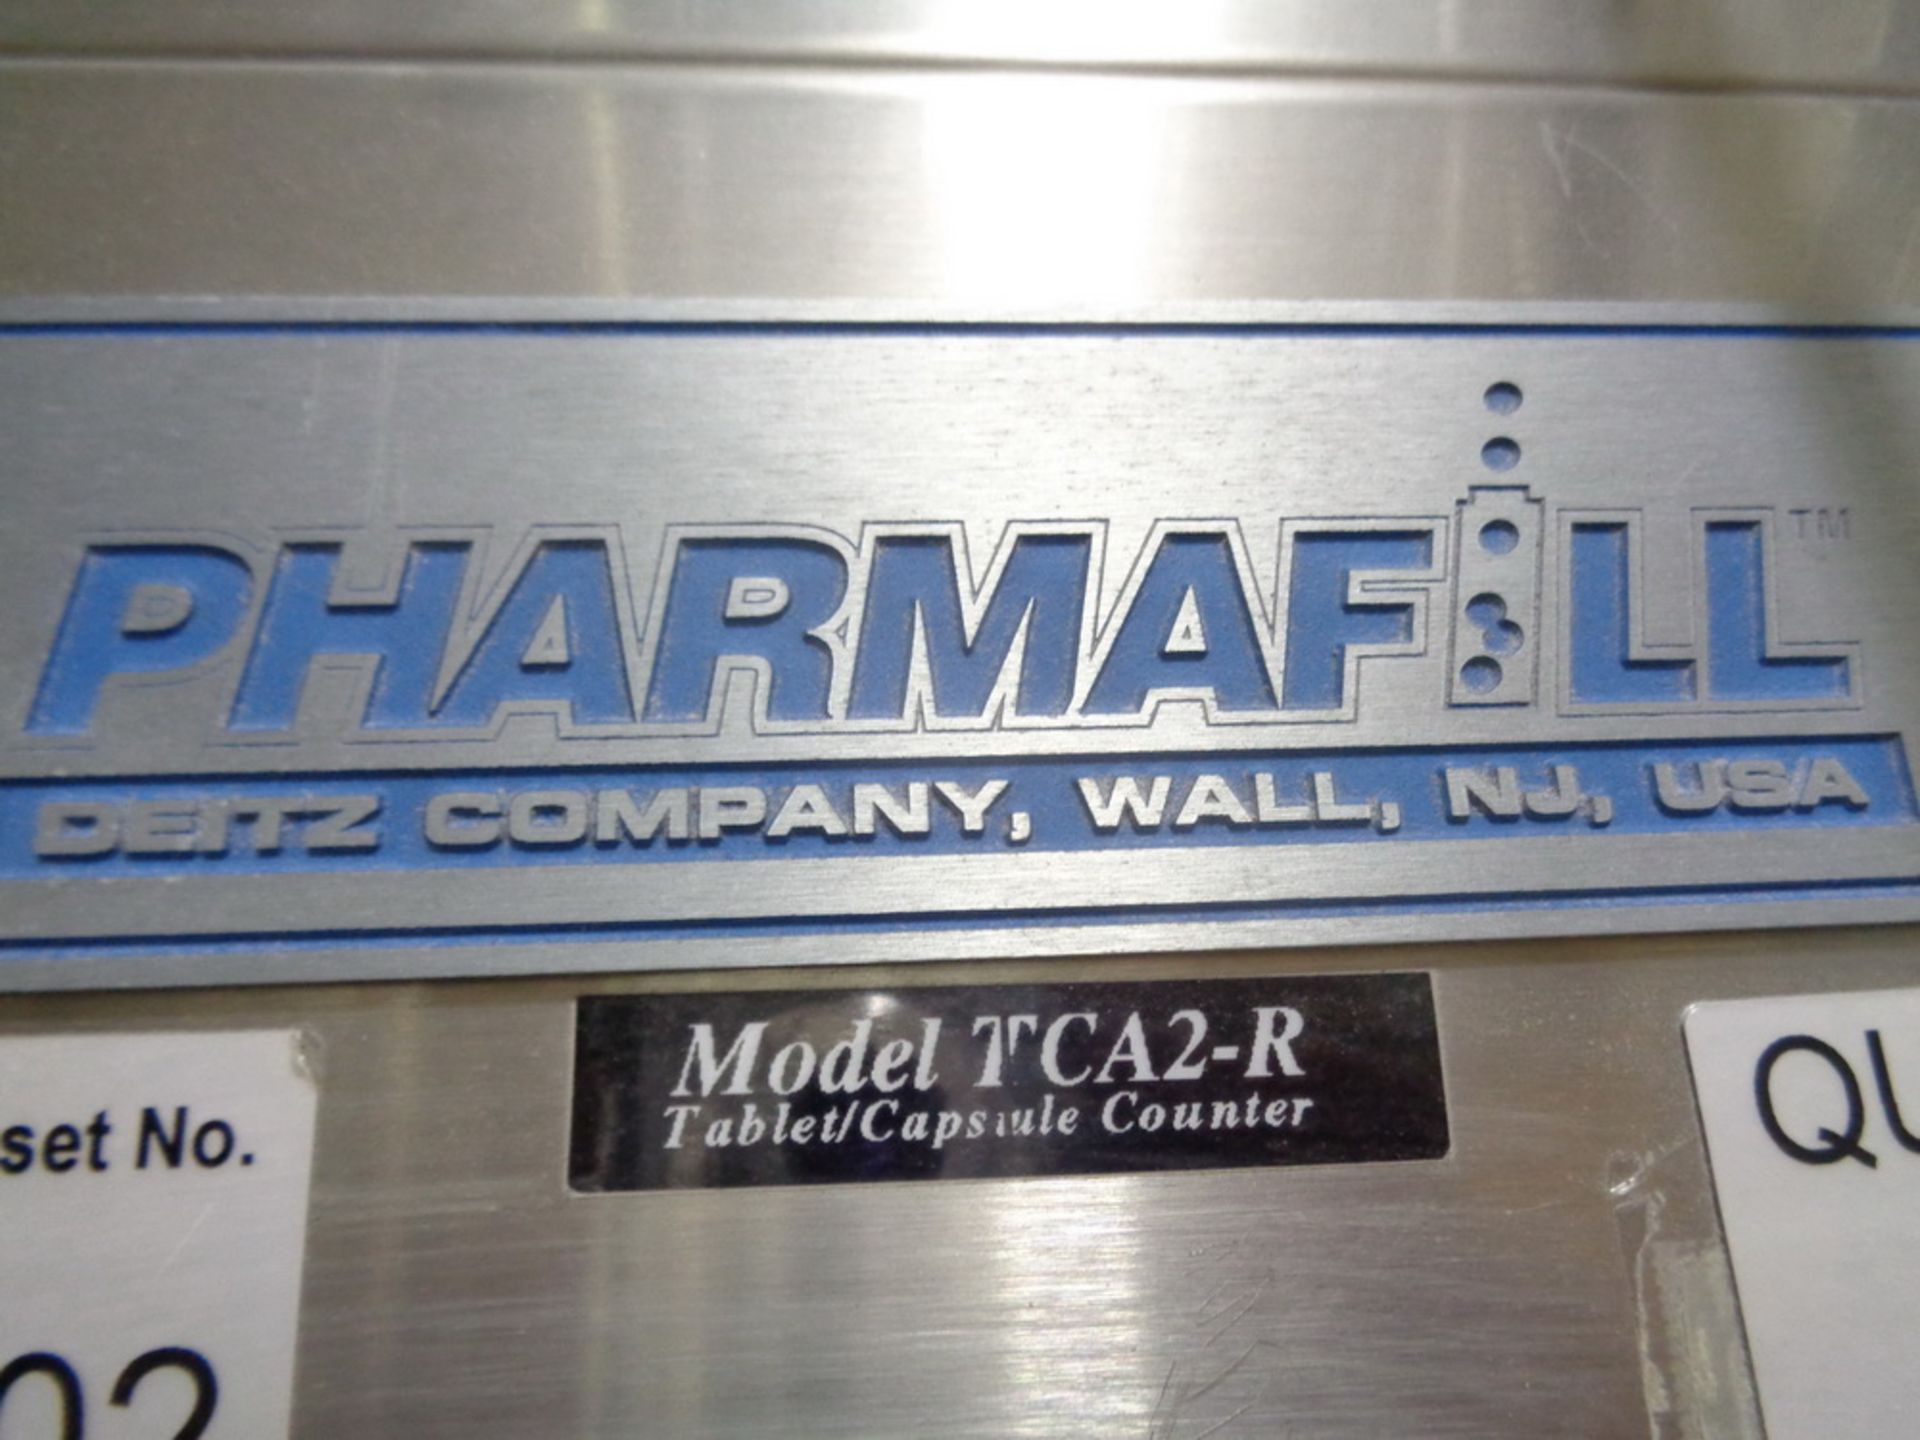 Pharmafill Electronic Automatic Tablet Counter, Model TCA2-R, S/N M2141 - Image 3 of 7